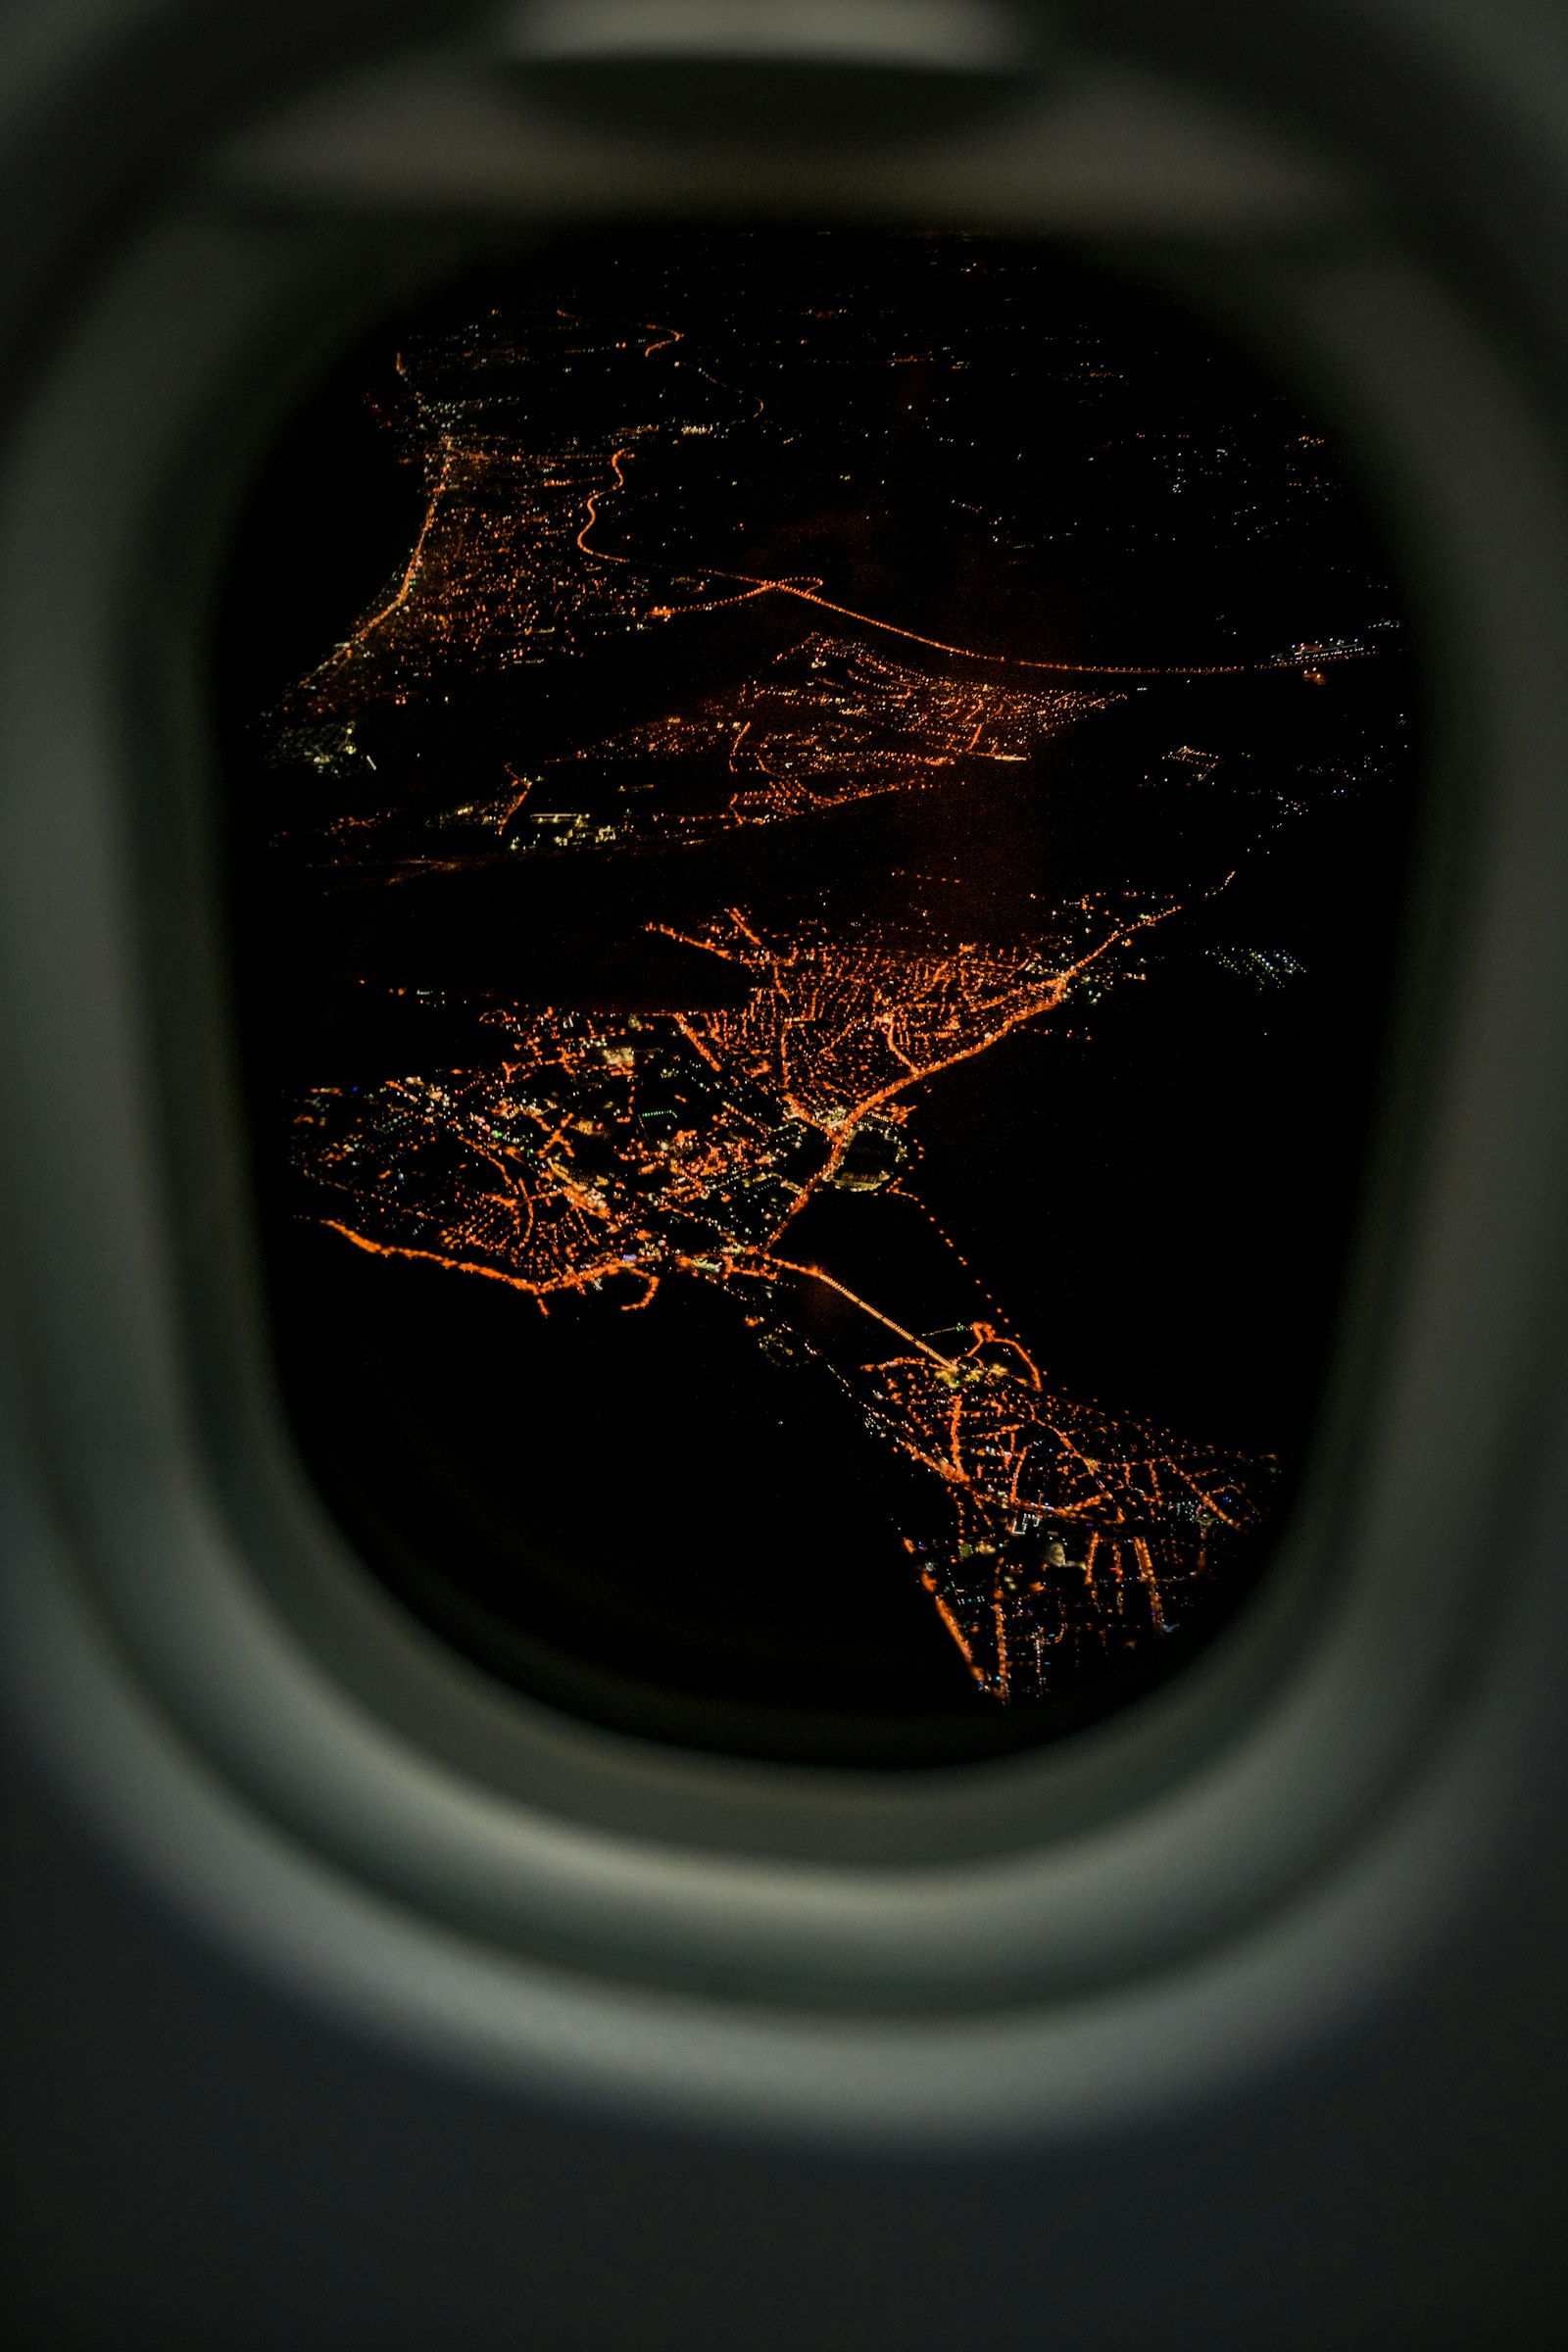 DT 0mm F0 SAM sample photo. Lighted city airplane view photography